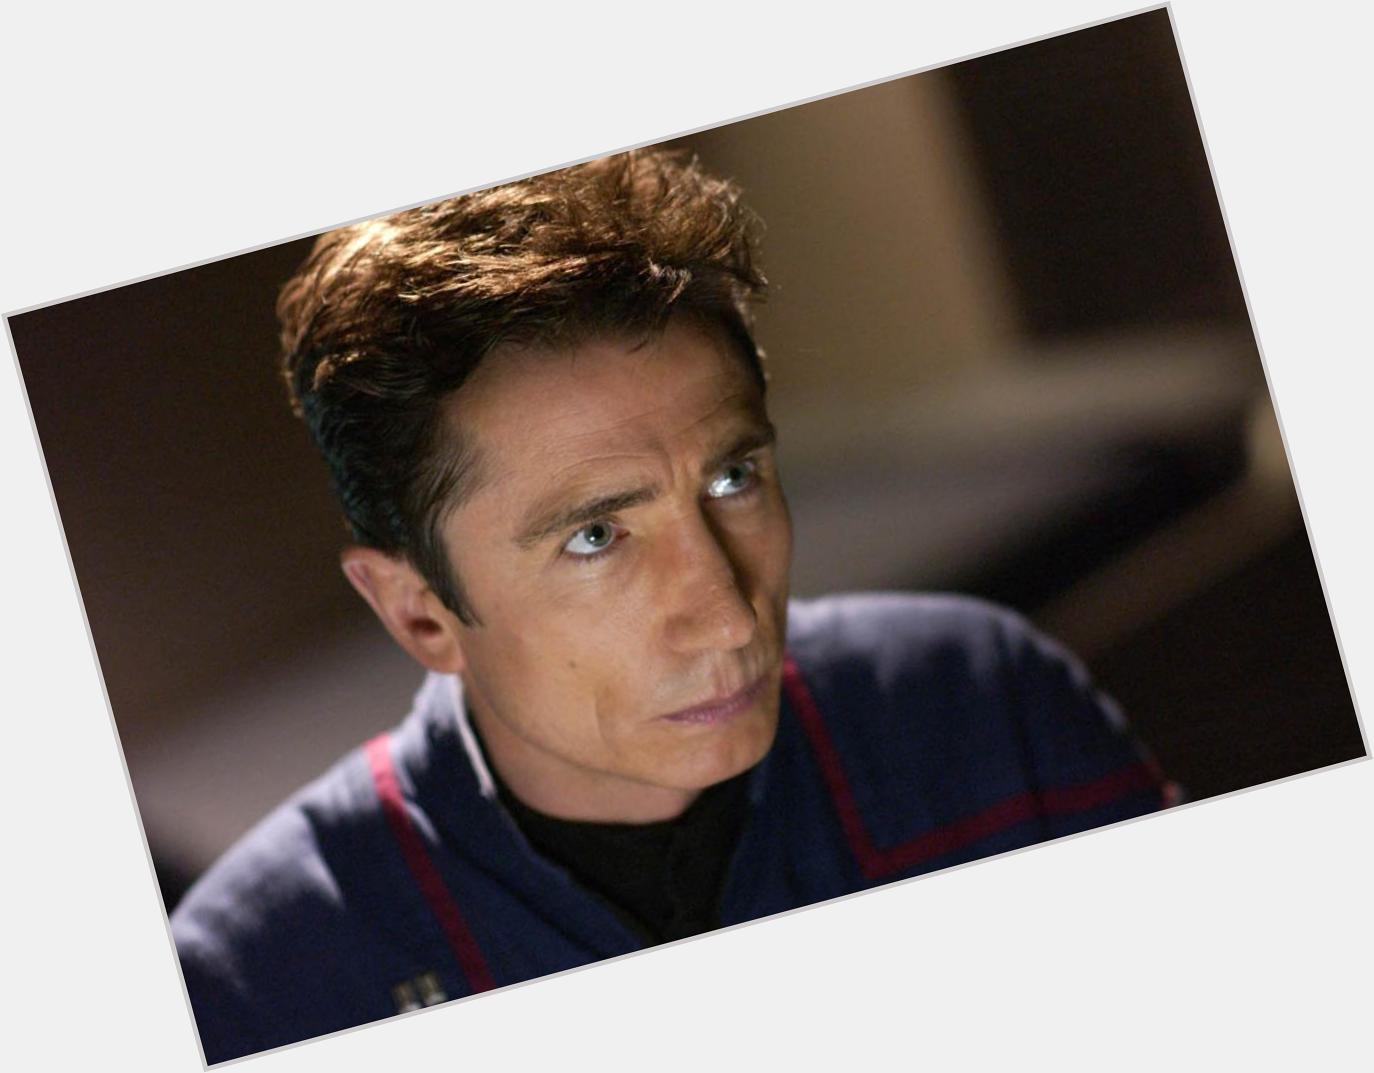 Happy birthday to ENTERPRISE\s Malcolm Reed - actor Dominic Keating! Our exclusive interview:  